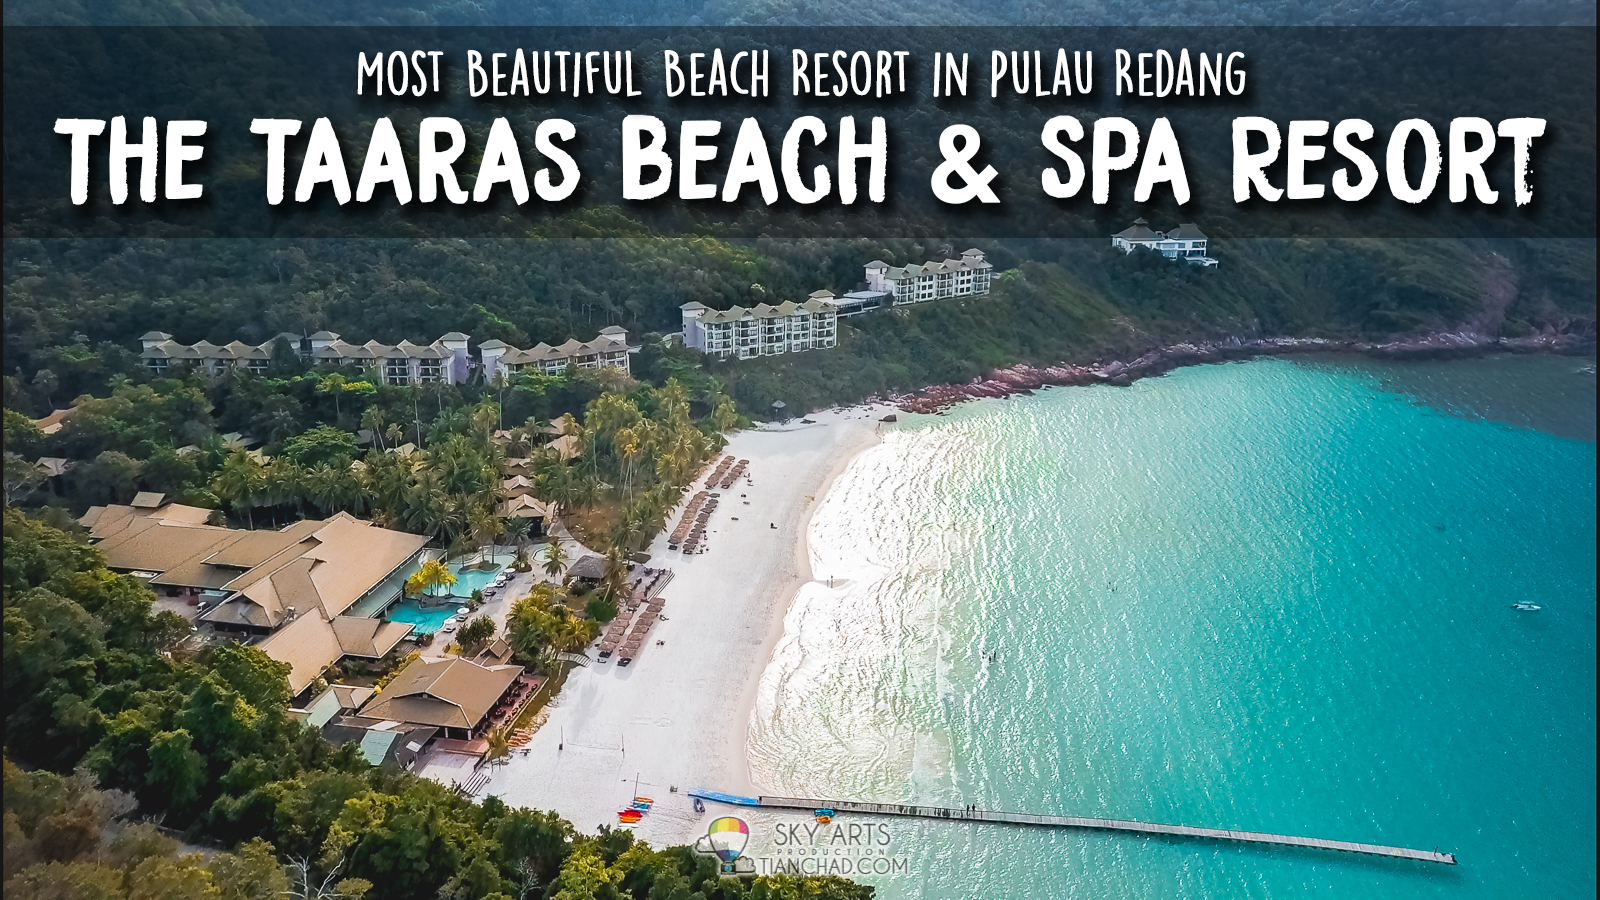 【Review】13 Things To Do In The Taaras Beach & Spa Resort | Pulau Redang